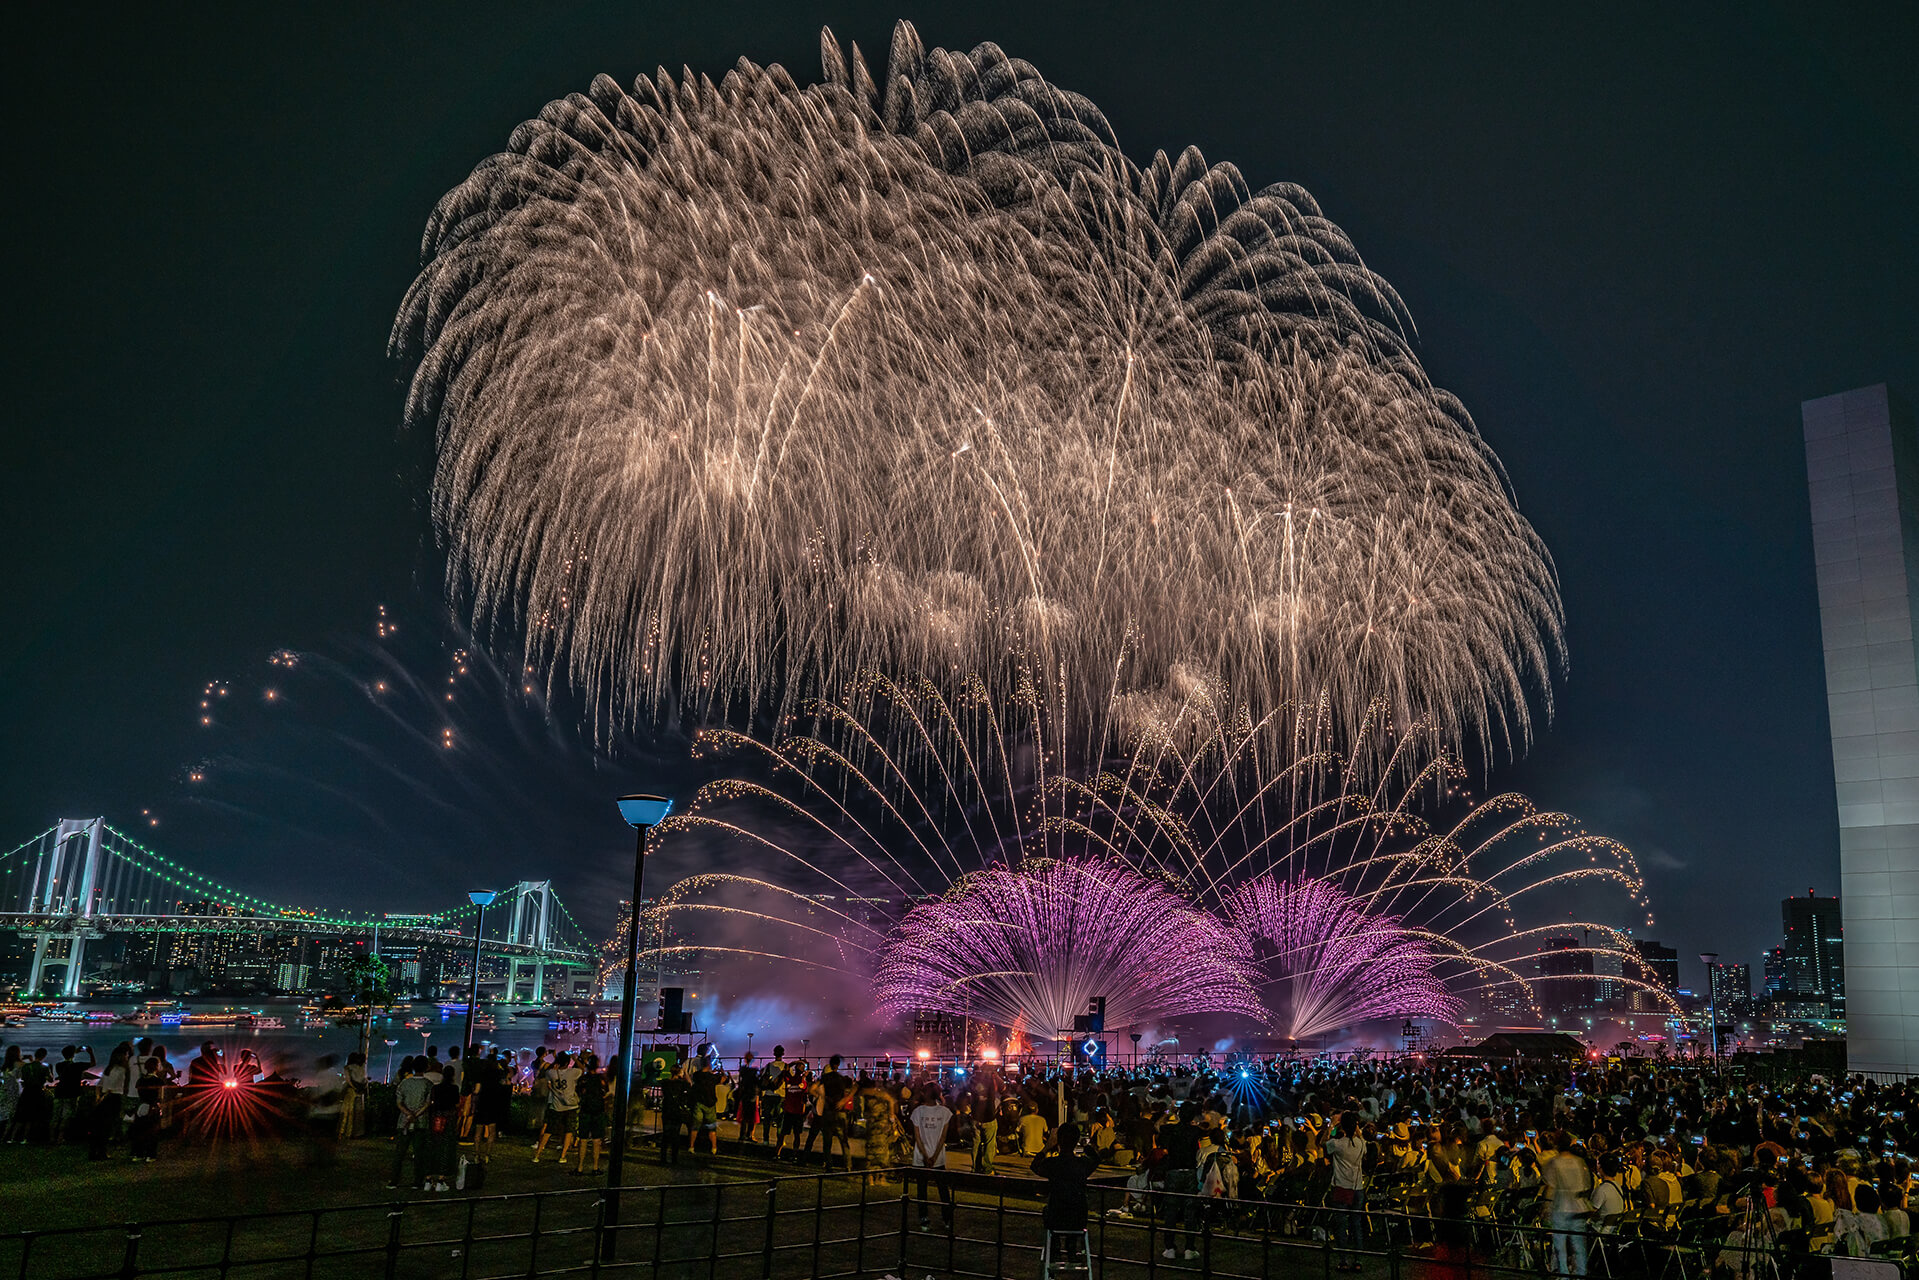 Fireworks lights up the night view of Tokyo